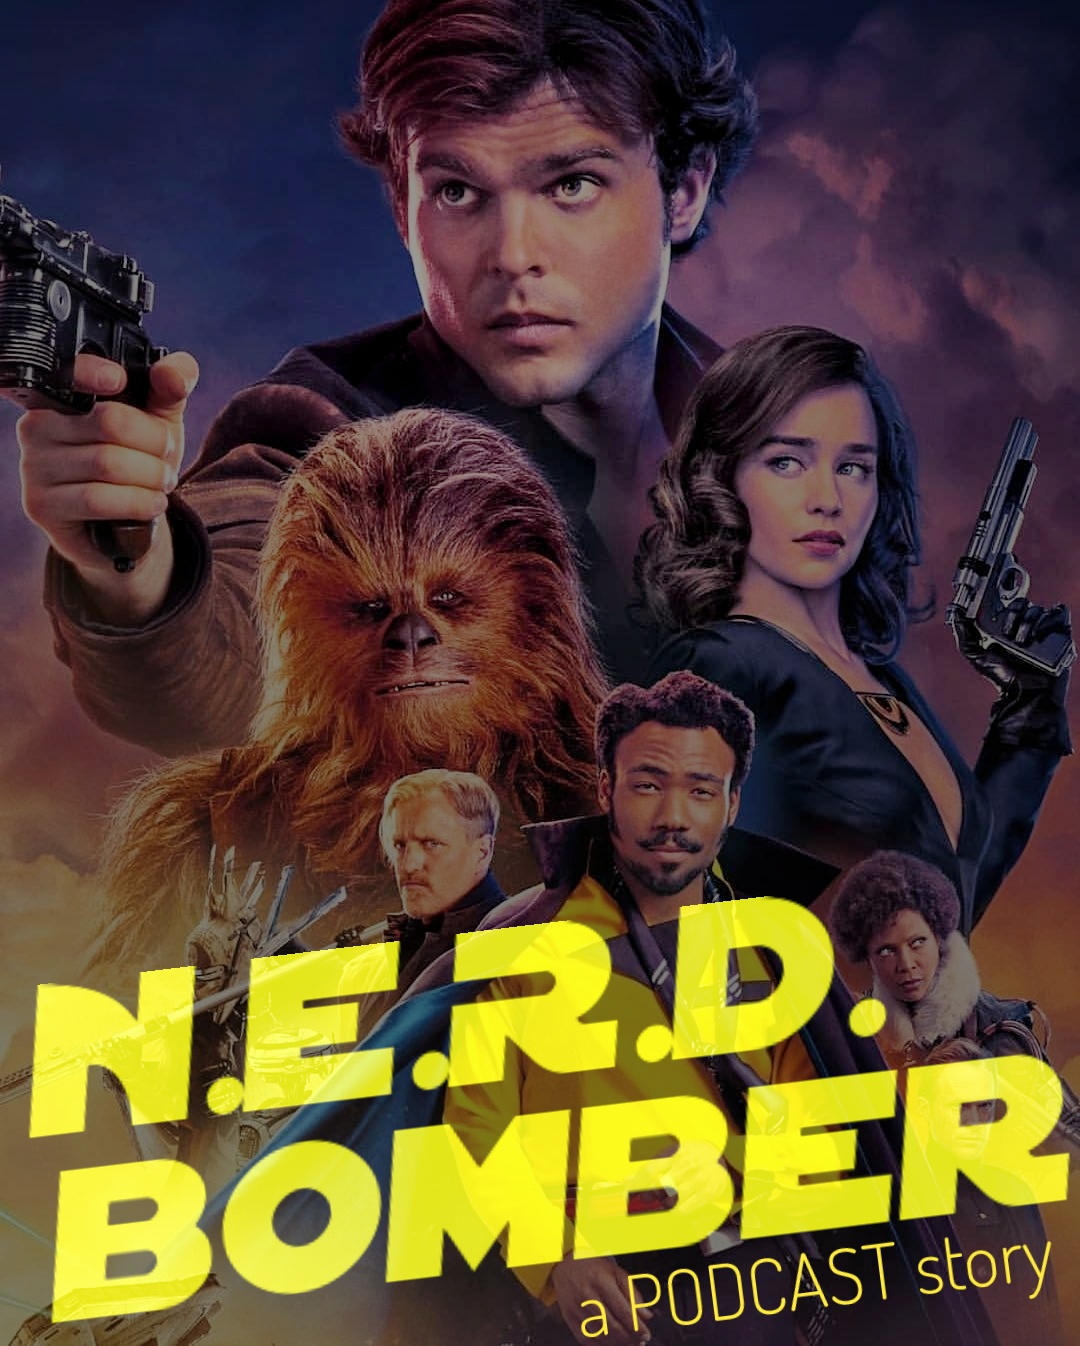 N.E.R.D.Bomber Reviews: Solo A Star Wars Story